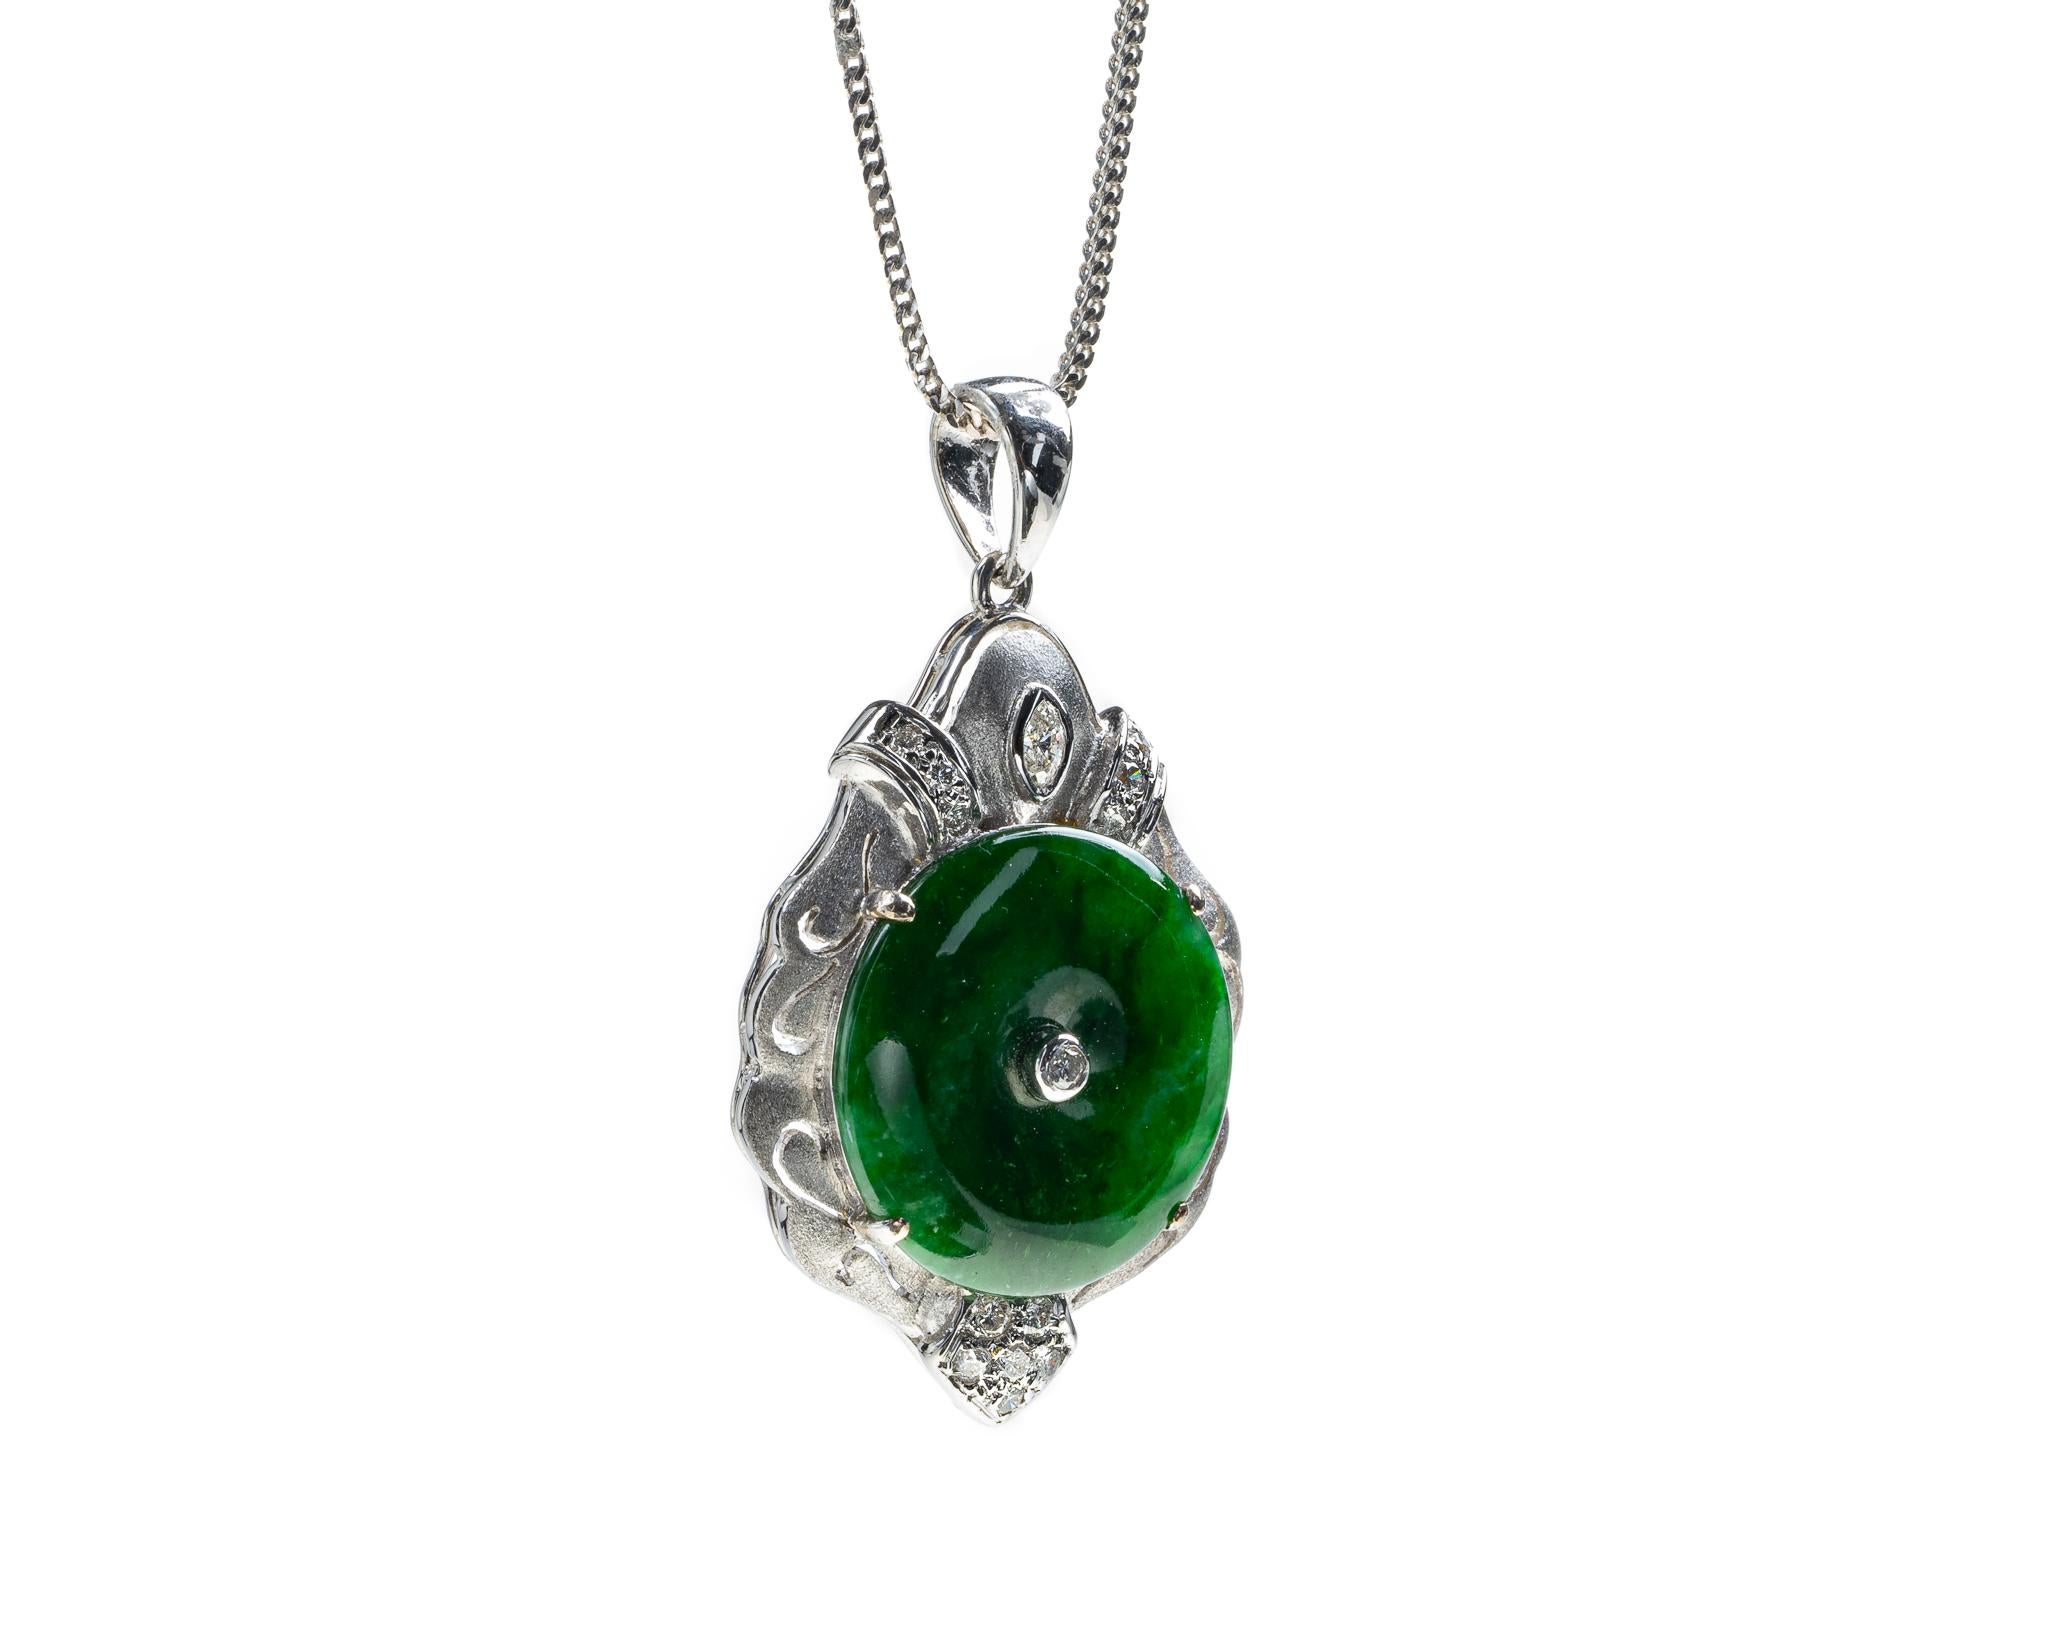 This is an all natural, untreated jadeite jade carved pi disc and diamond pendant set on an 18K white gold and diamond bail.  The carved pi disc symbolizes peace.   

It measures 1.24 inches (31.5mm ) x 0.83 inches (21.1 mm) with thickness of 0.21